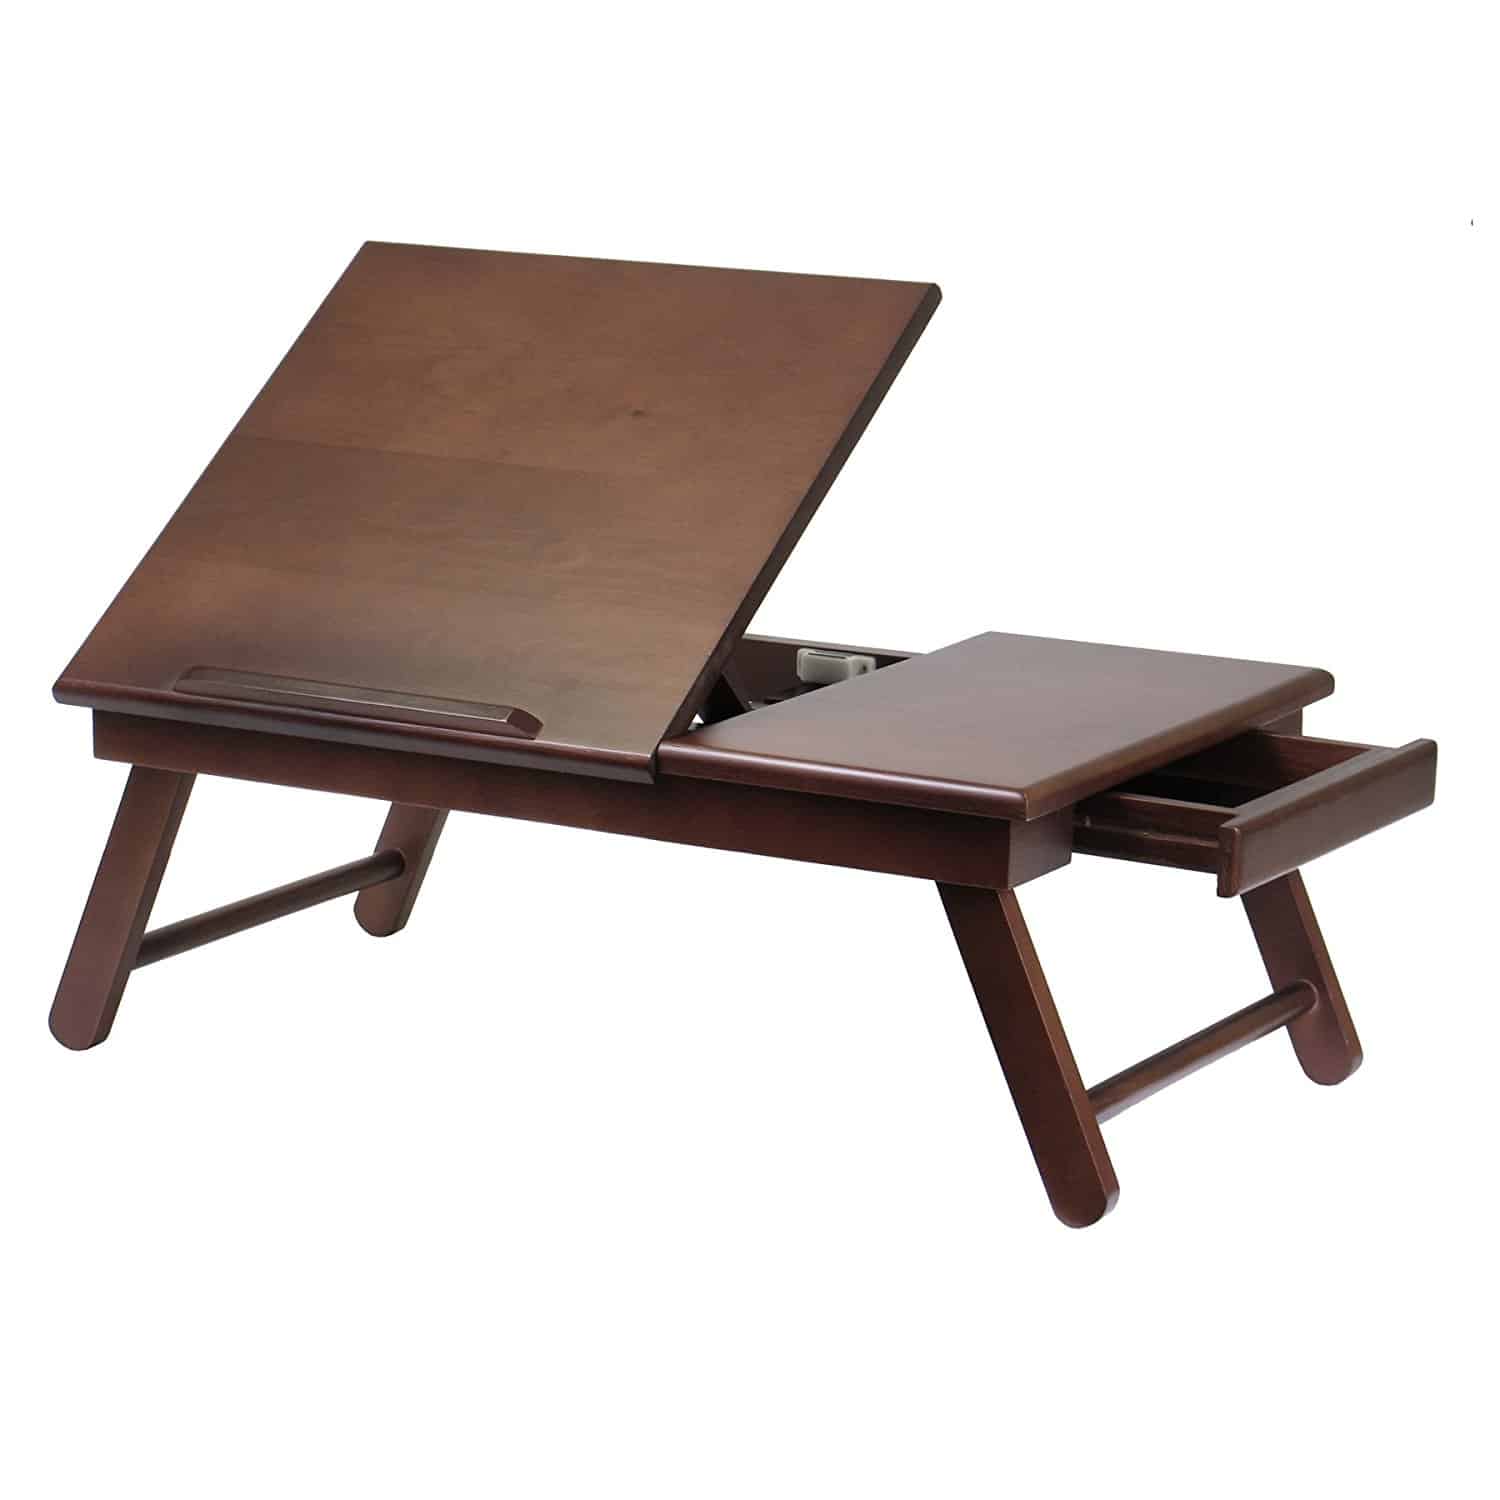 The Winsome Wood Alden Lap Desk with Foldable Legs